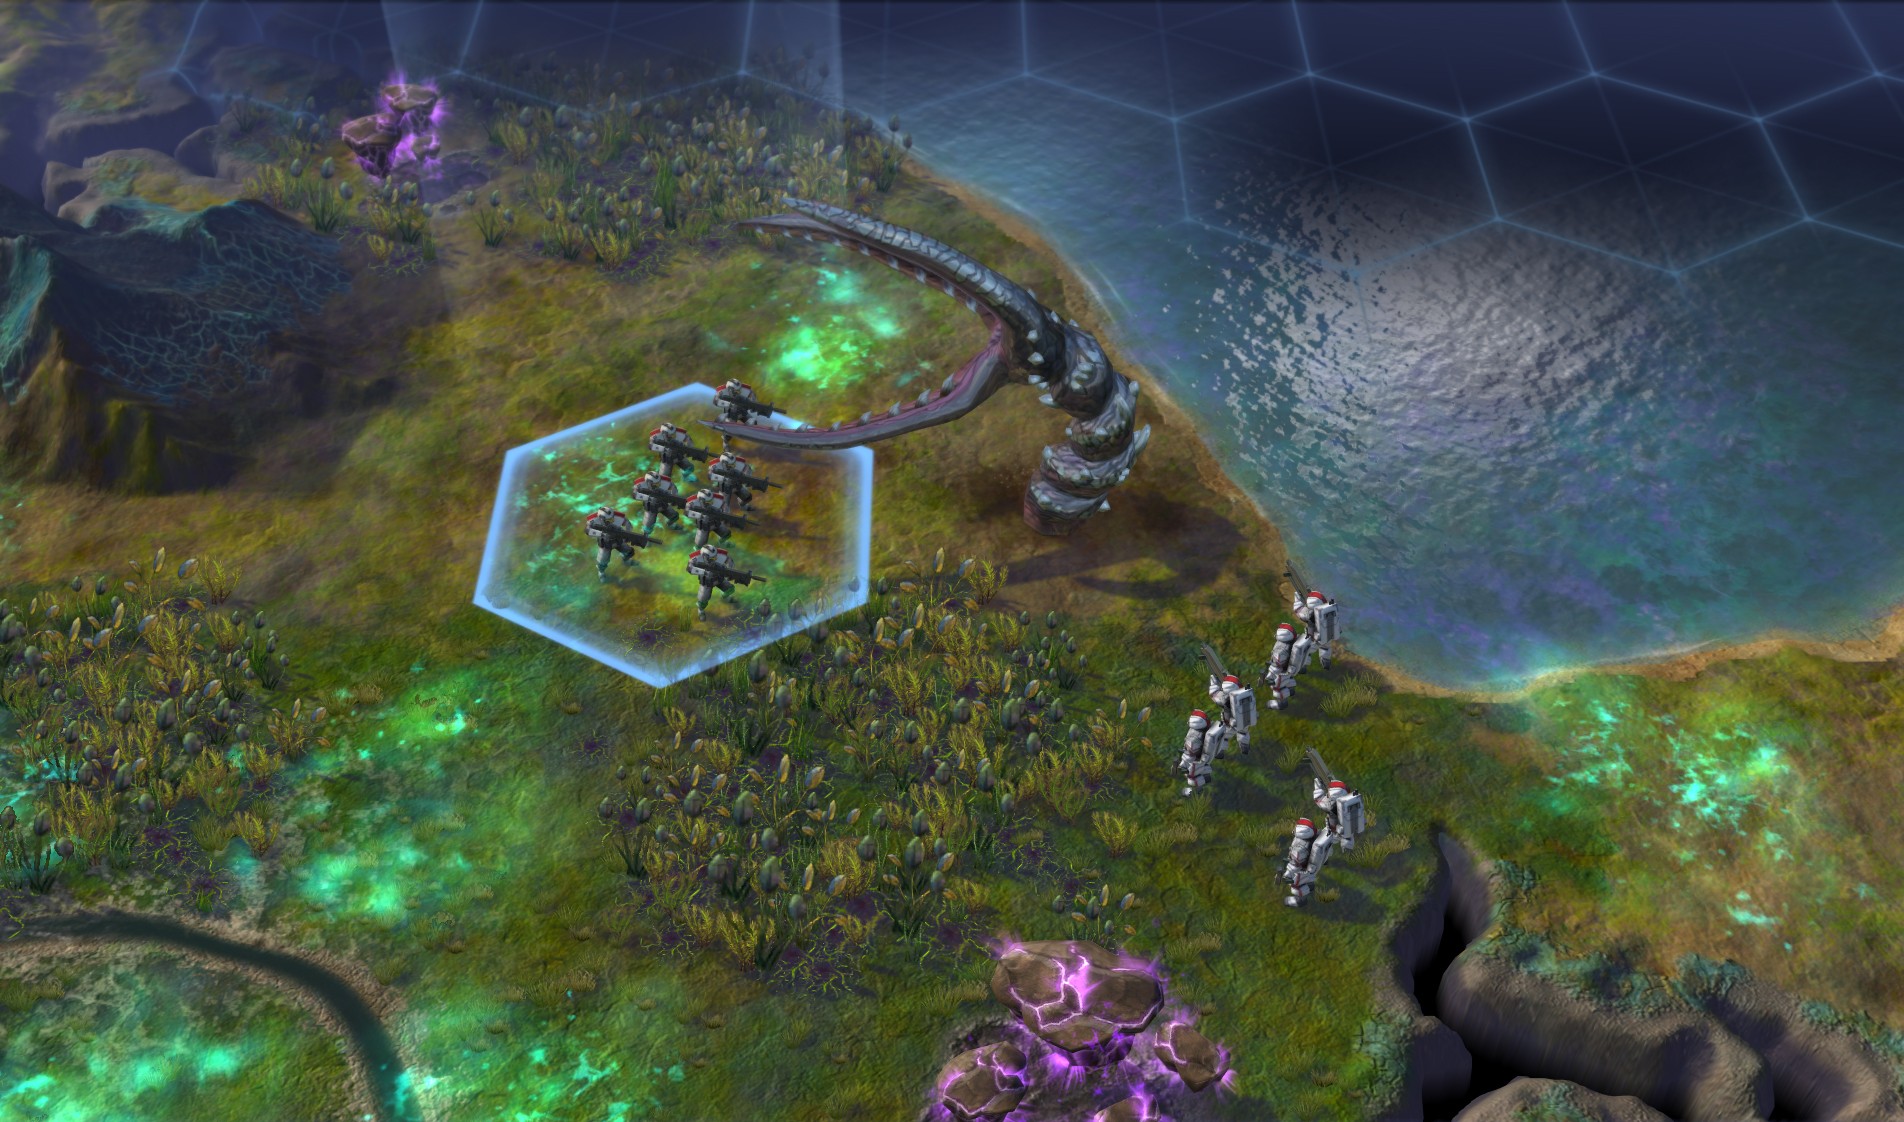 Civilization: beyond earth 1.1.4 download free